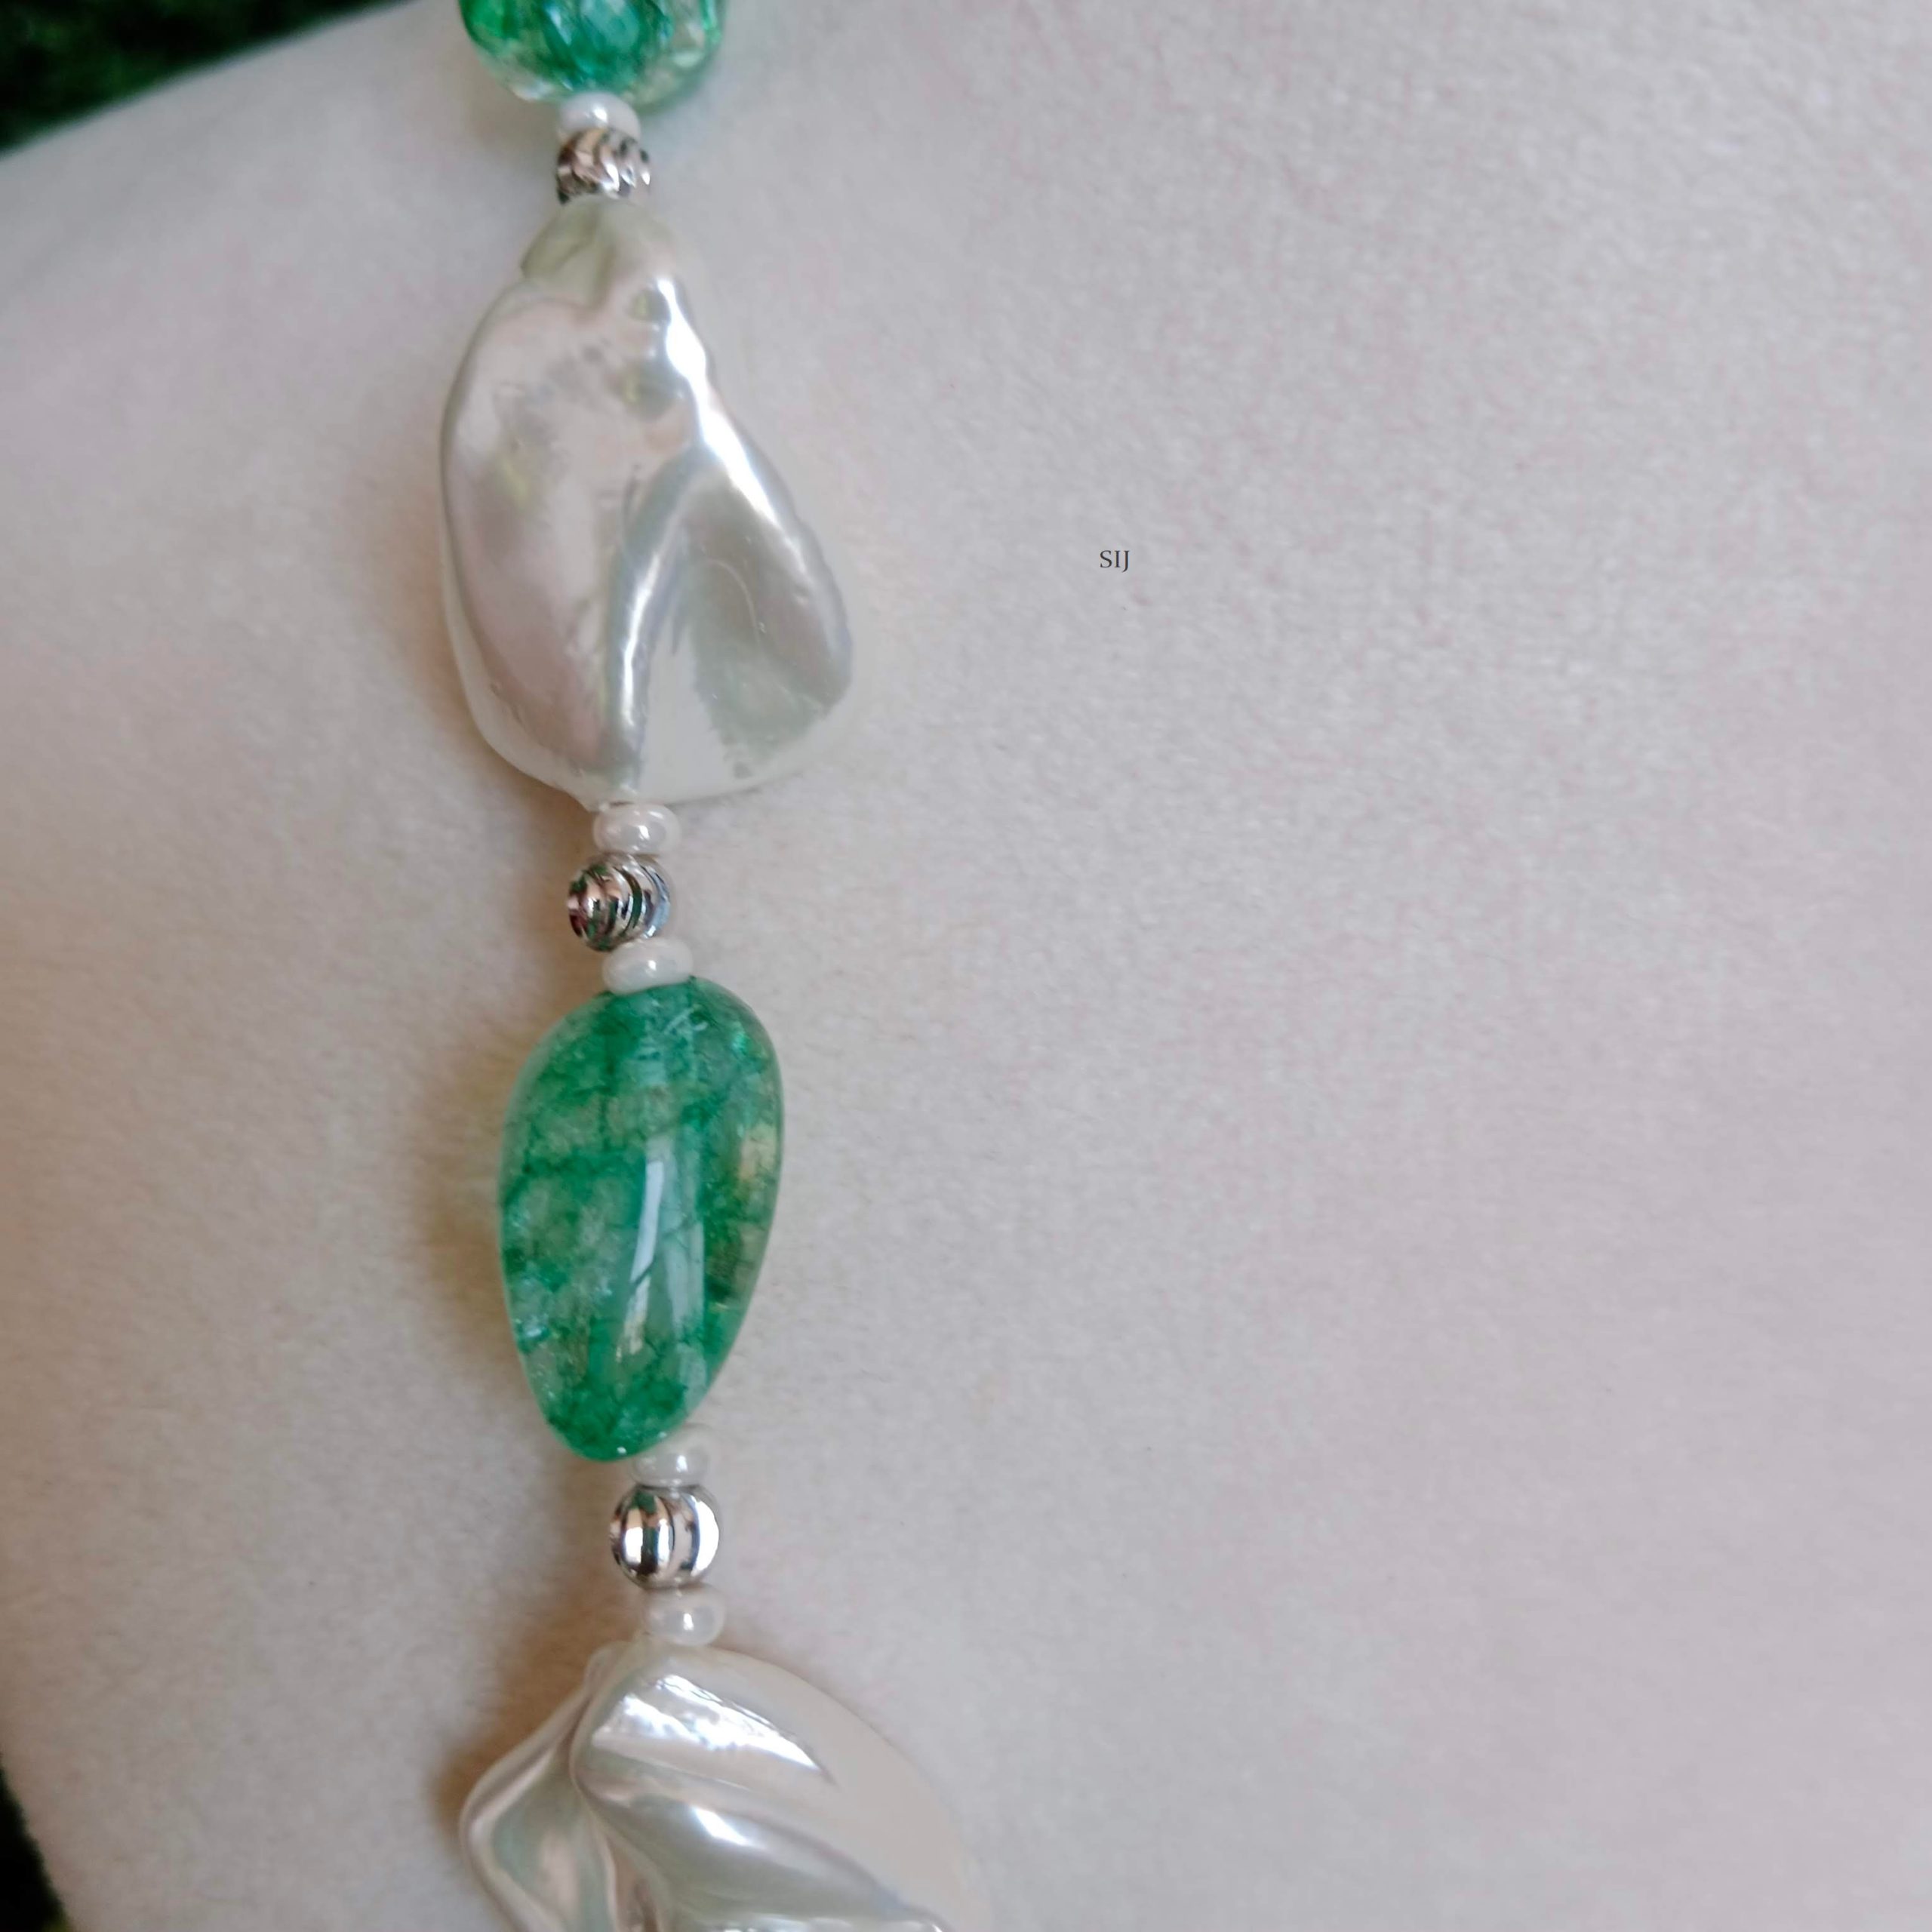 Imitation Green Bead and Pearls Necklace